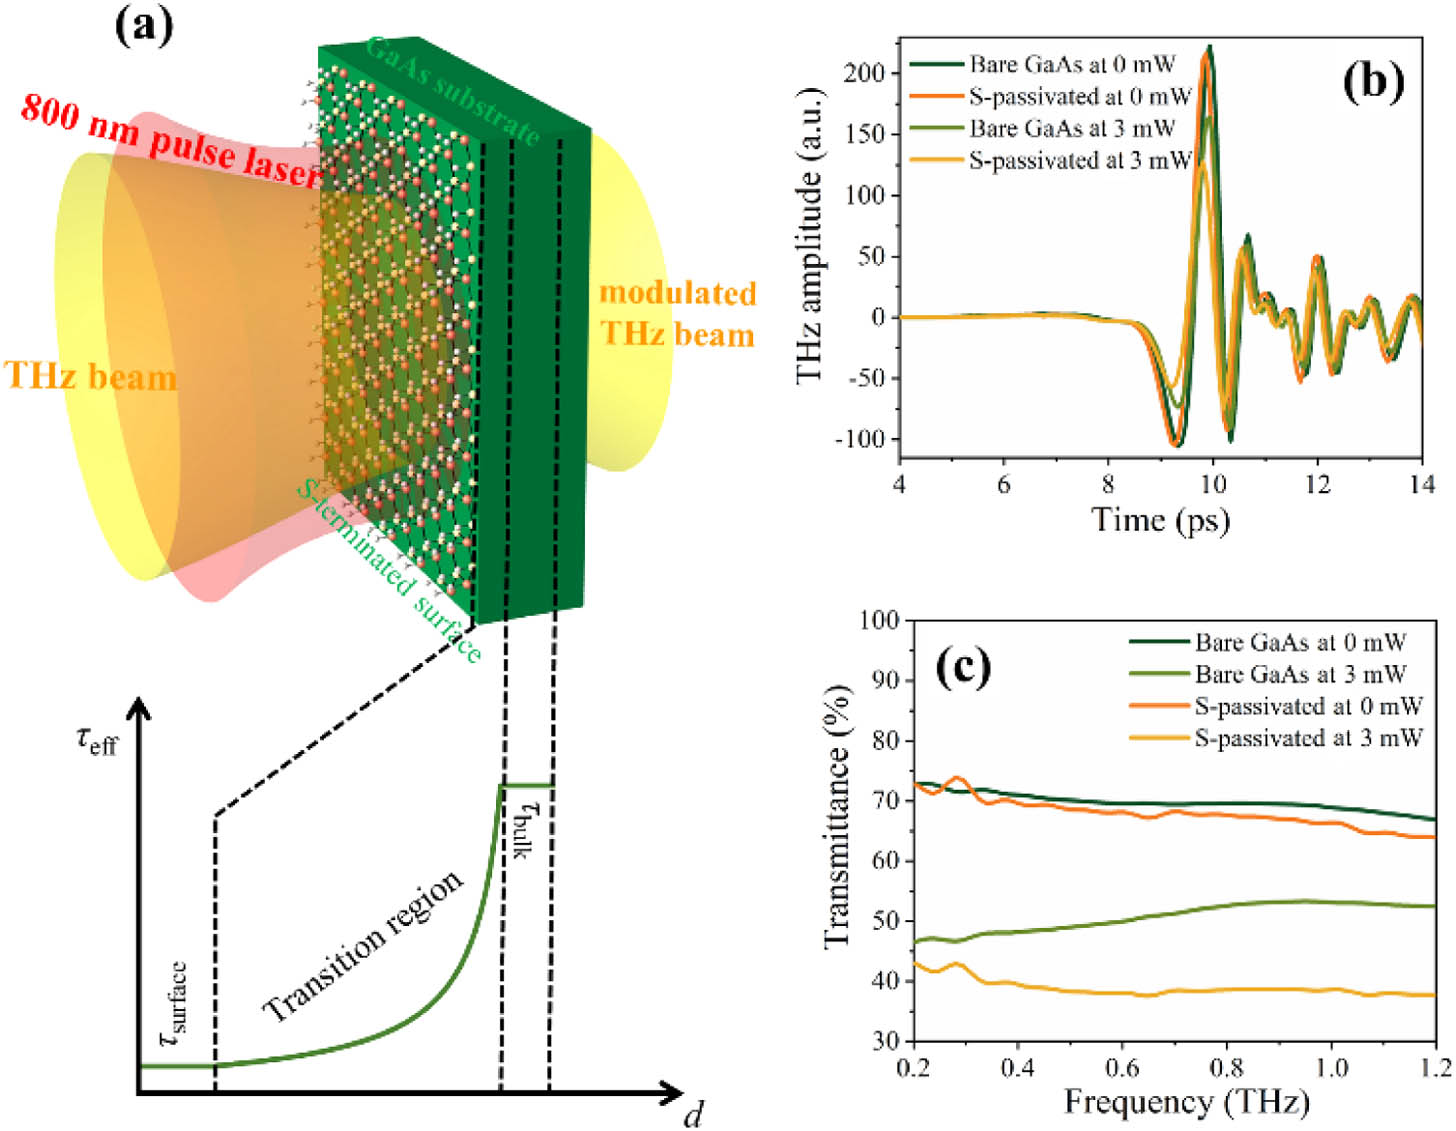 Characterization of THz modulation performance through the S-passivated and bare GaAs samples. (a) Schematic of the S-passivated GaAs based all-optical spatial THz modulator, where an 800 nm pulse laser is adopted as optical excitation, which has a spot diameter of 5 mm to completely encapsulate the incident THz beam (3 mm). Bottom graph illustrates the penetration depth (d) dependence of the effective carrier lifetime (τeff) when the photodoping power is varied. (b) Detected transmitted time domain spectra; and (c) corresponding frequency domain spectra calculated from (b).